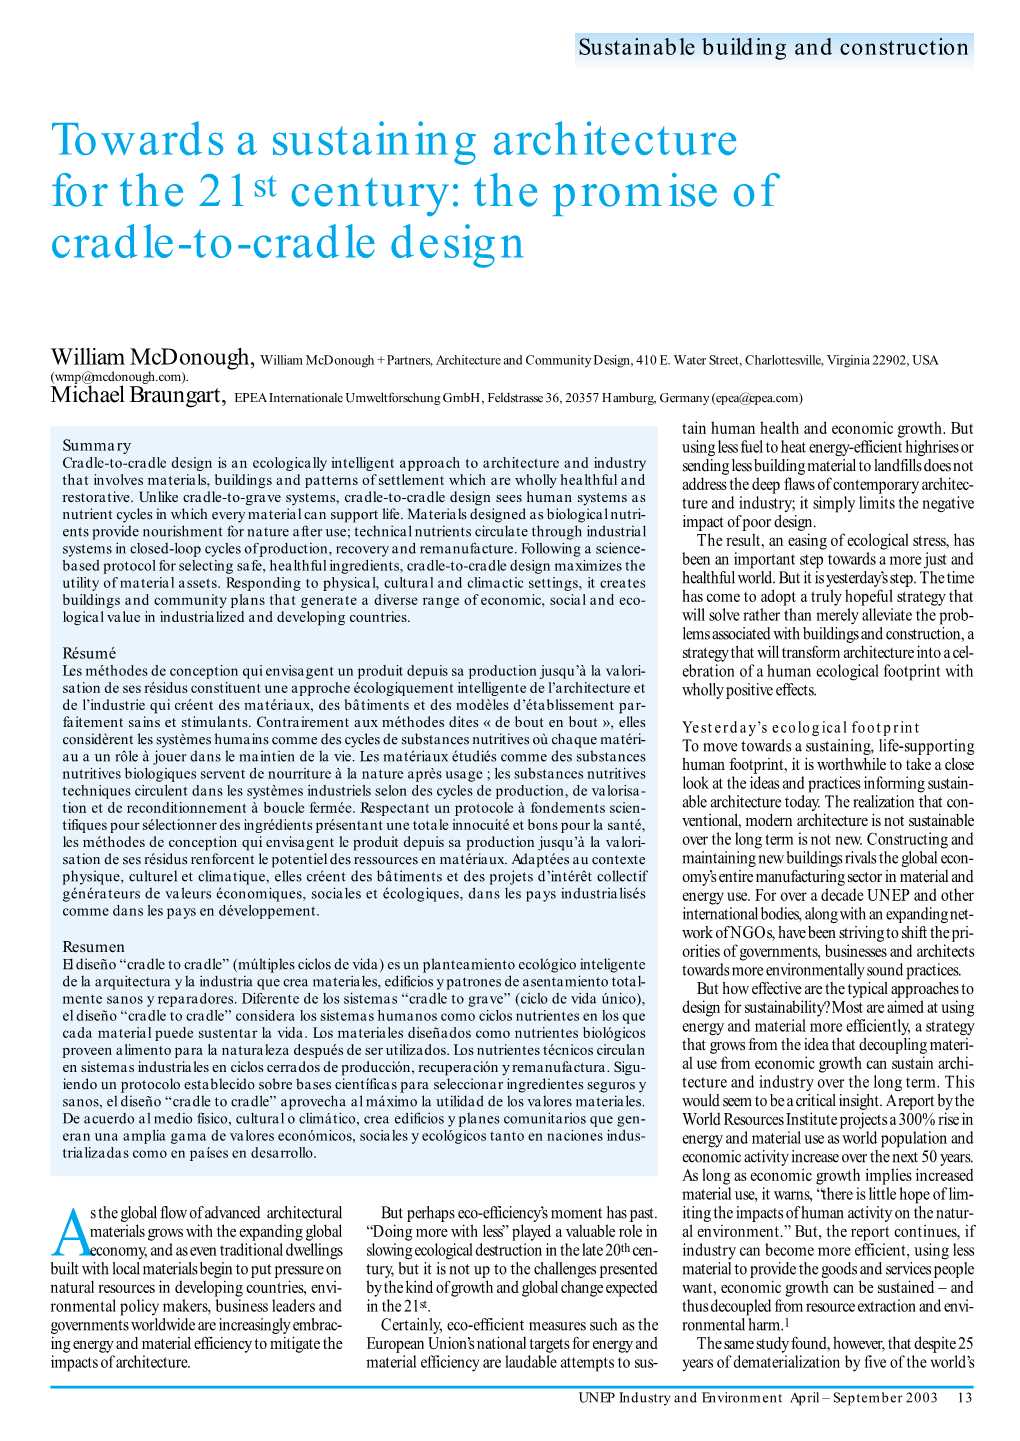 Towards a Sustaining Architecture for the 21St Century: the Promise of Cradle-To-Cradle Design